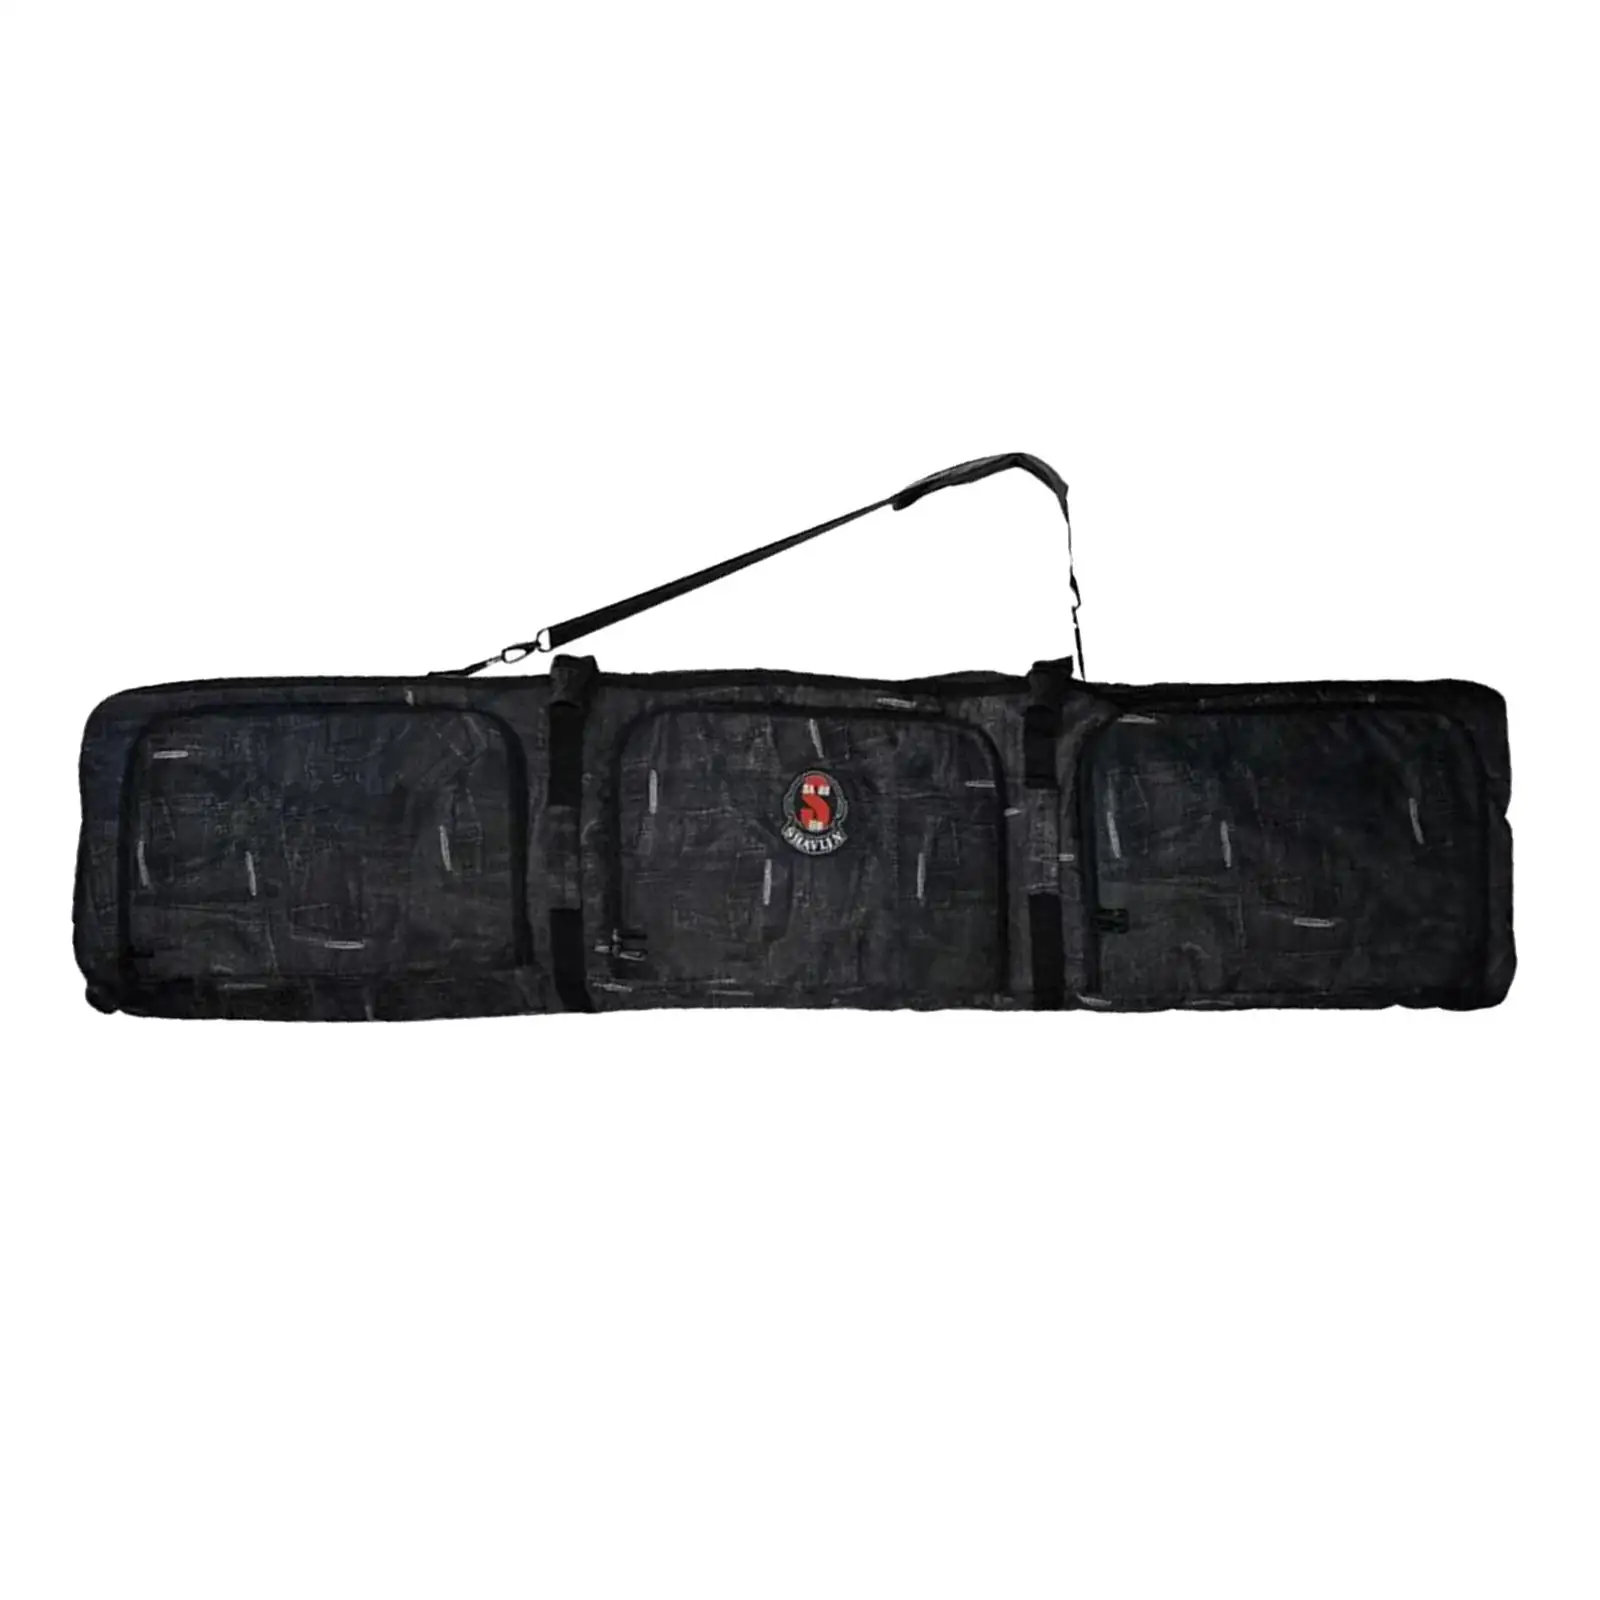 Snowboard Bag with Wheels Protection Snowboard Travel Bag for Air Travel